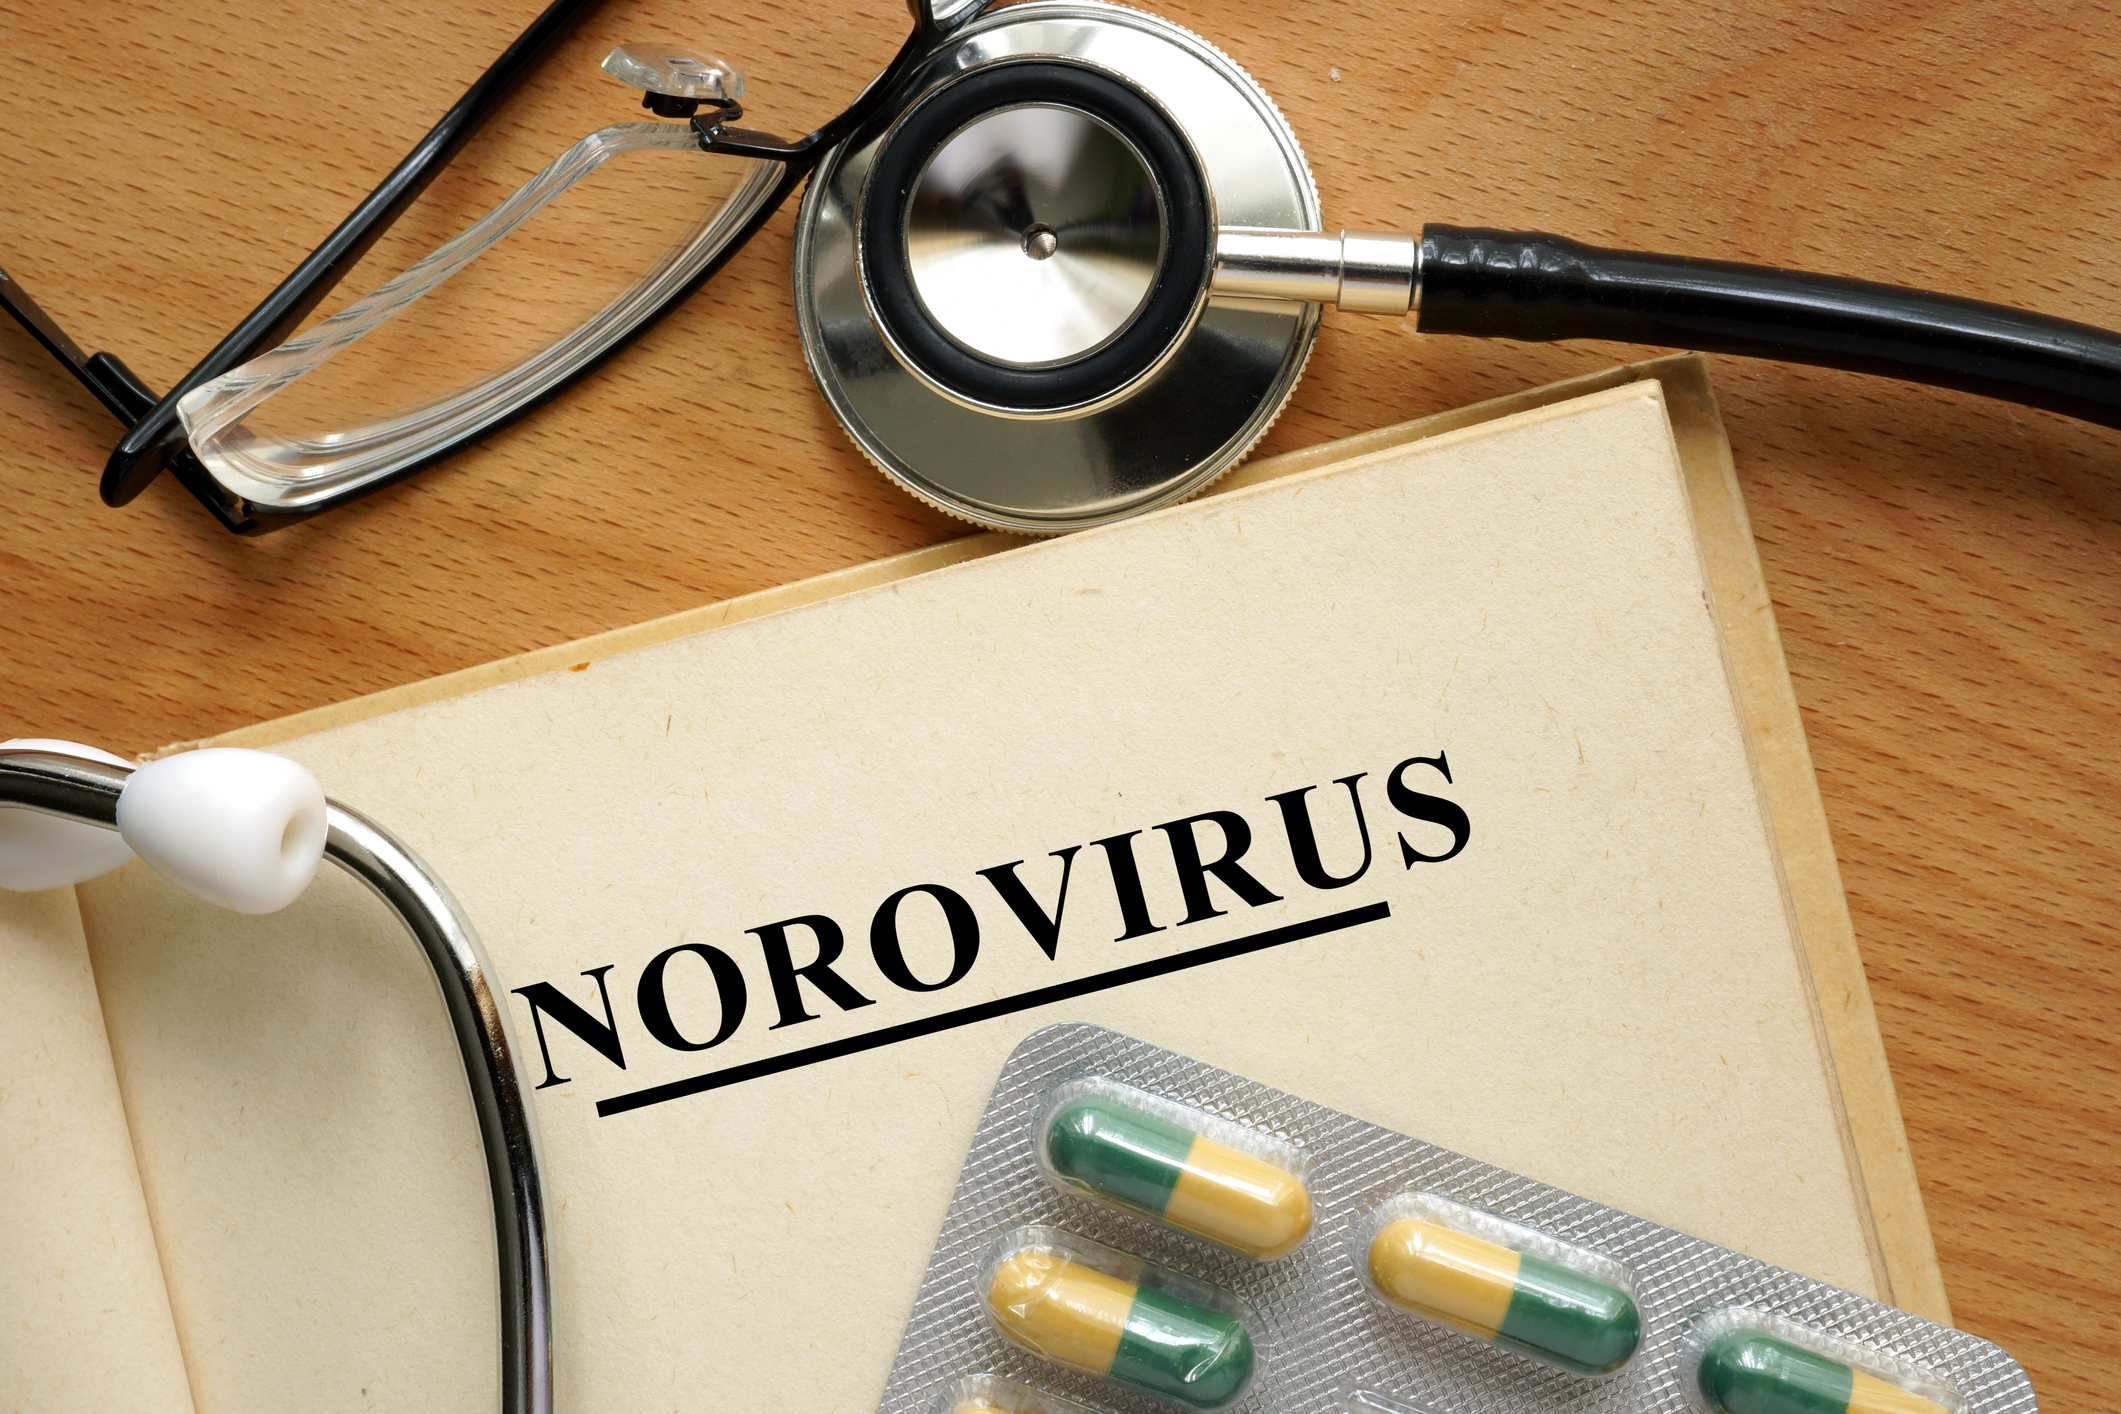 Stock imagegraphic of a page titled Norovirus with a stethoscope and oral pills in the frame